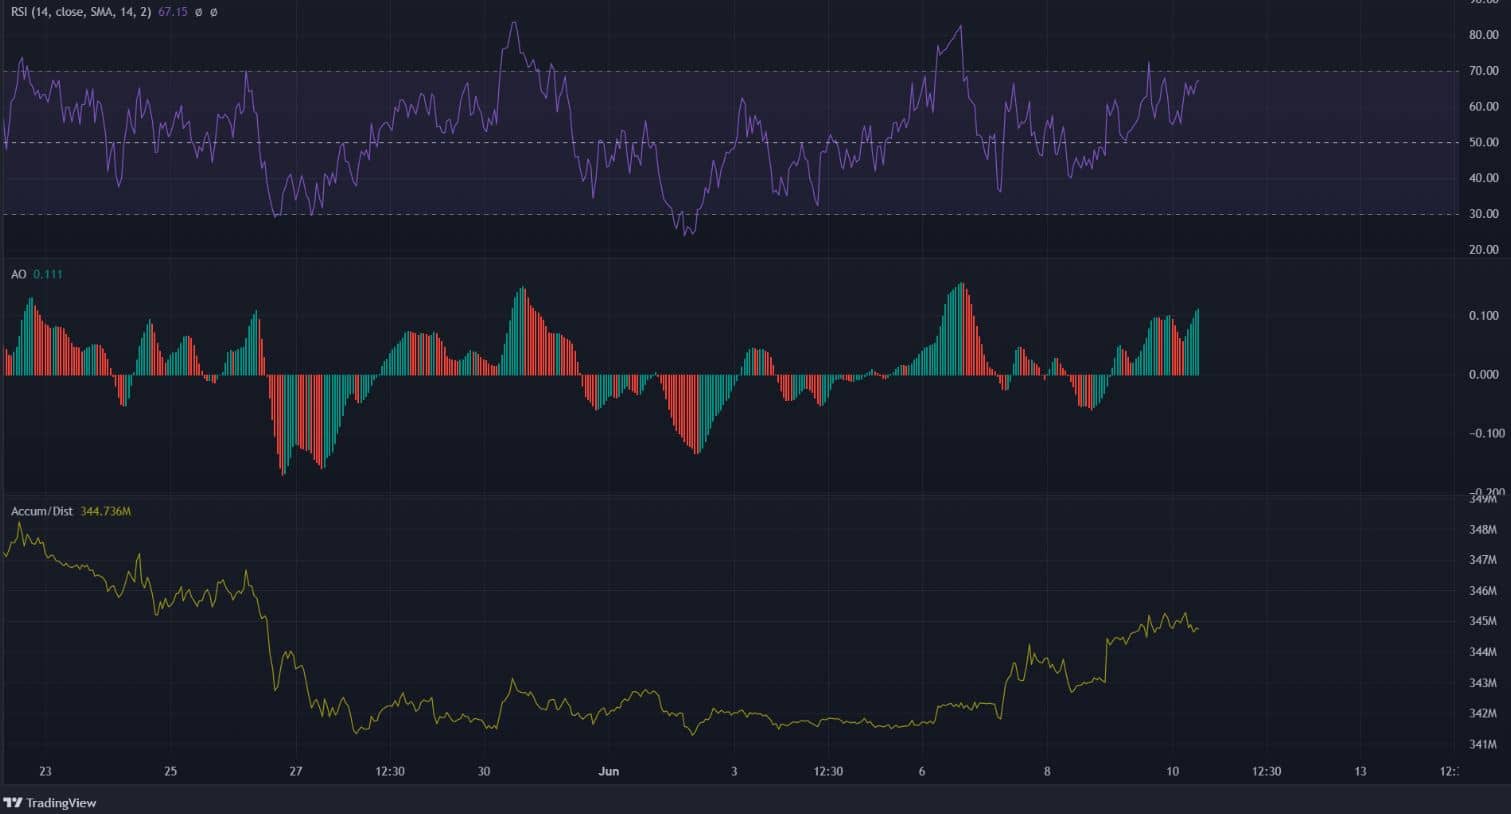 Tezos breaks above $2.2, how big is the shift in trend for XTZ going to be?